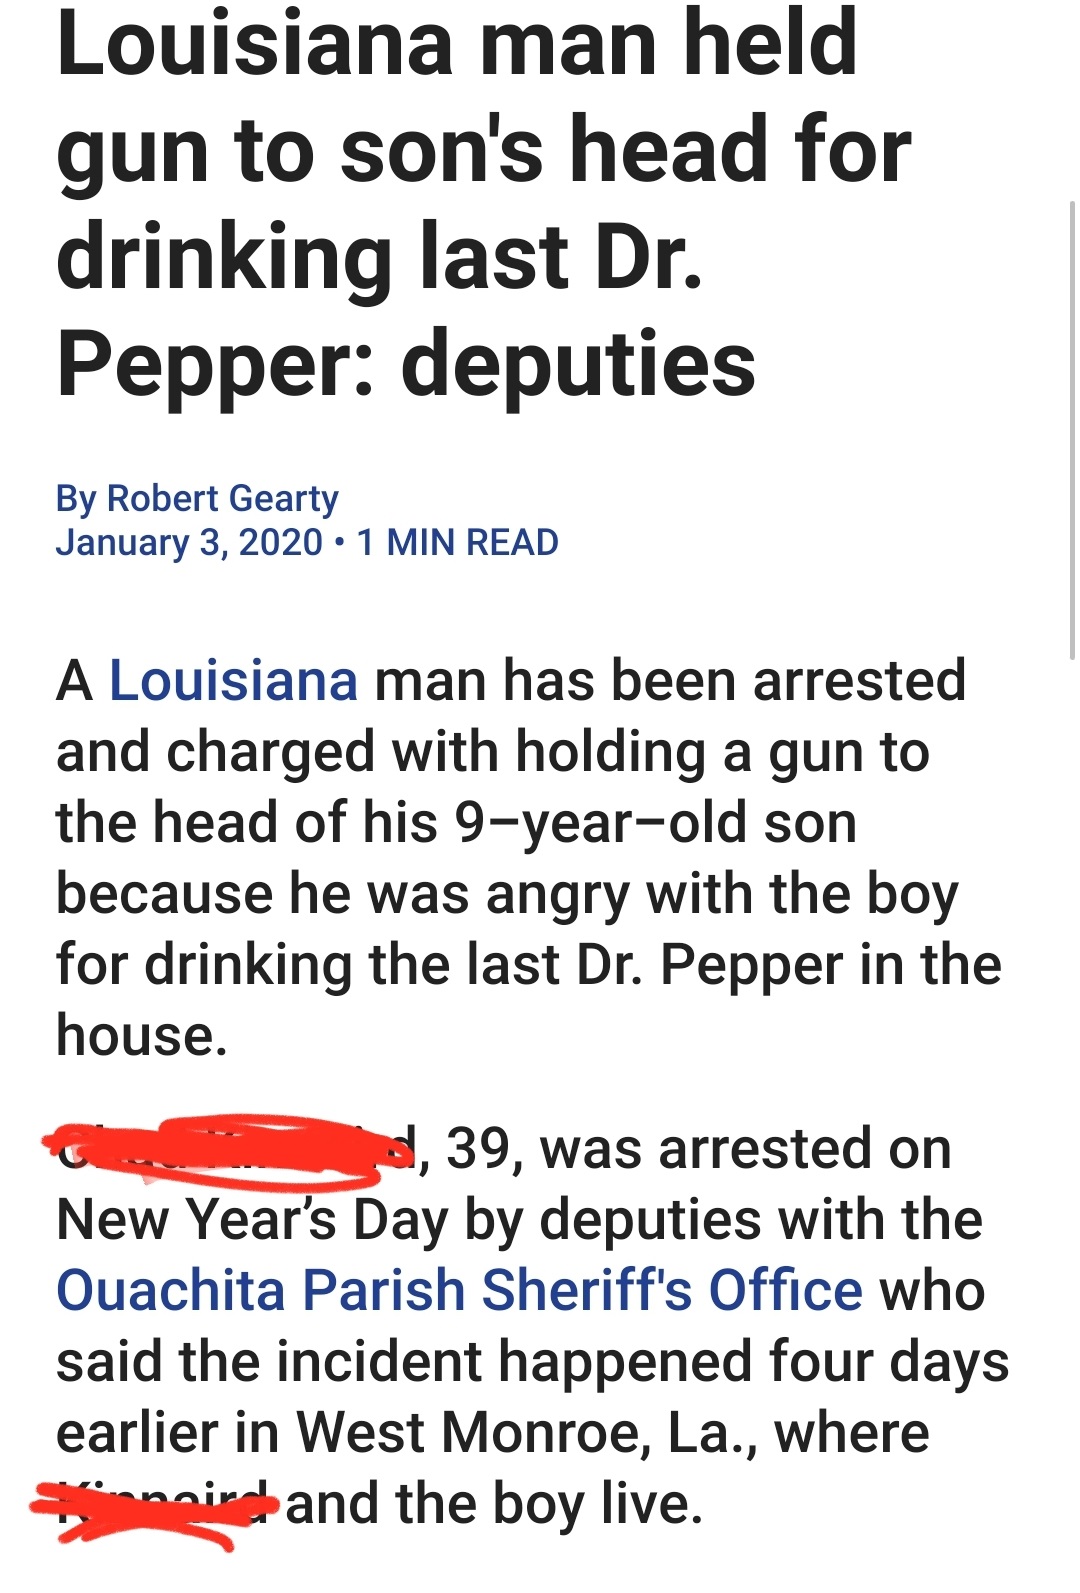 transgender wholesome - Louisiana man held gun to son's head for drinking last Dr. Pepper deputies By Robert Gearty 1 Min Read A Louisiana man has been arrested and charged with holding a gun to the head of his 9yearold son because he was angry with the b